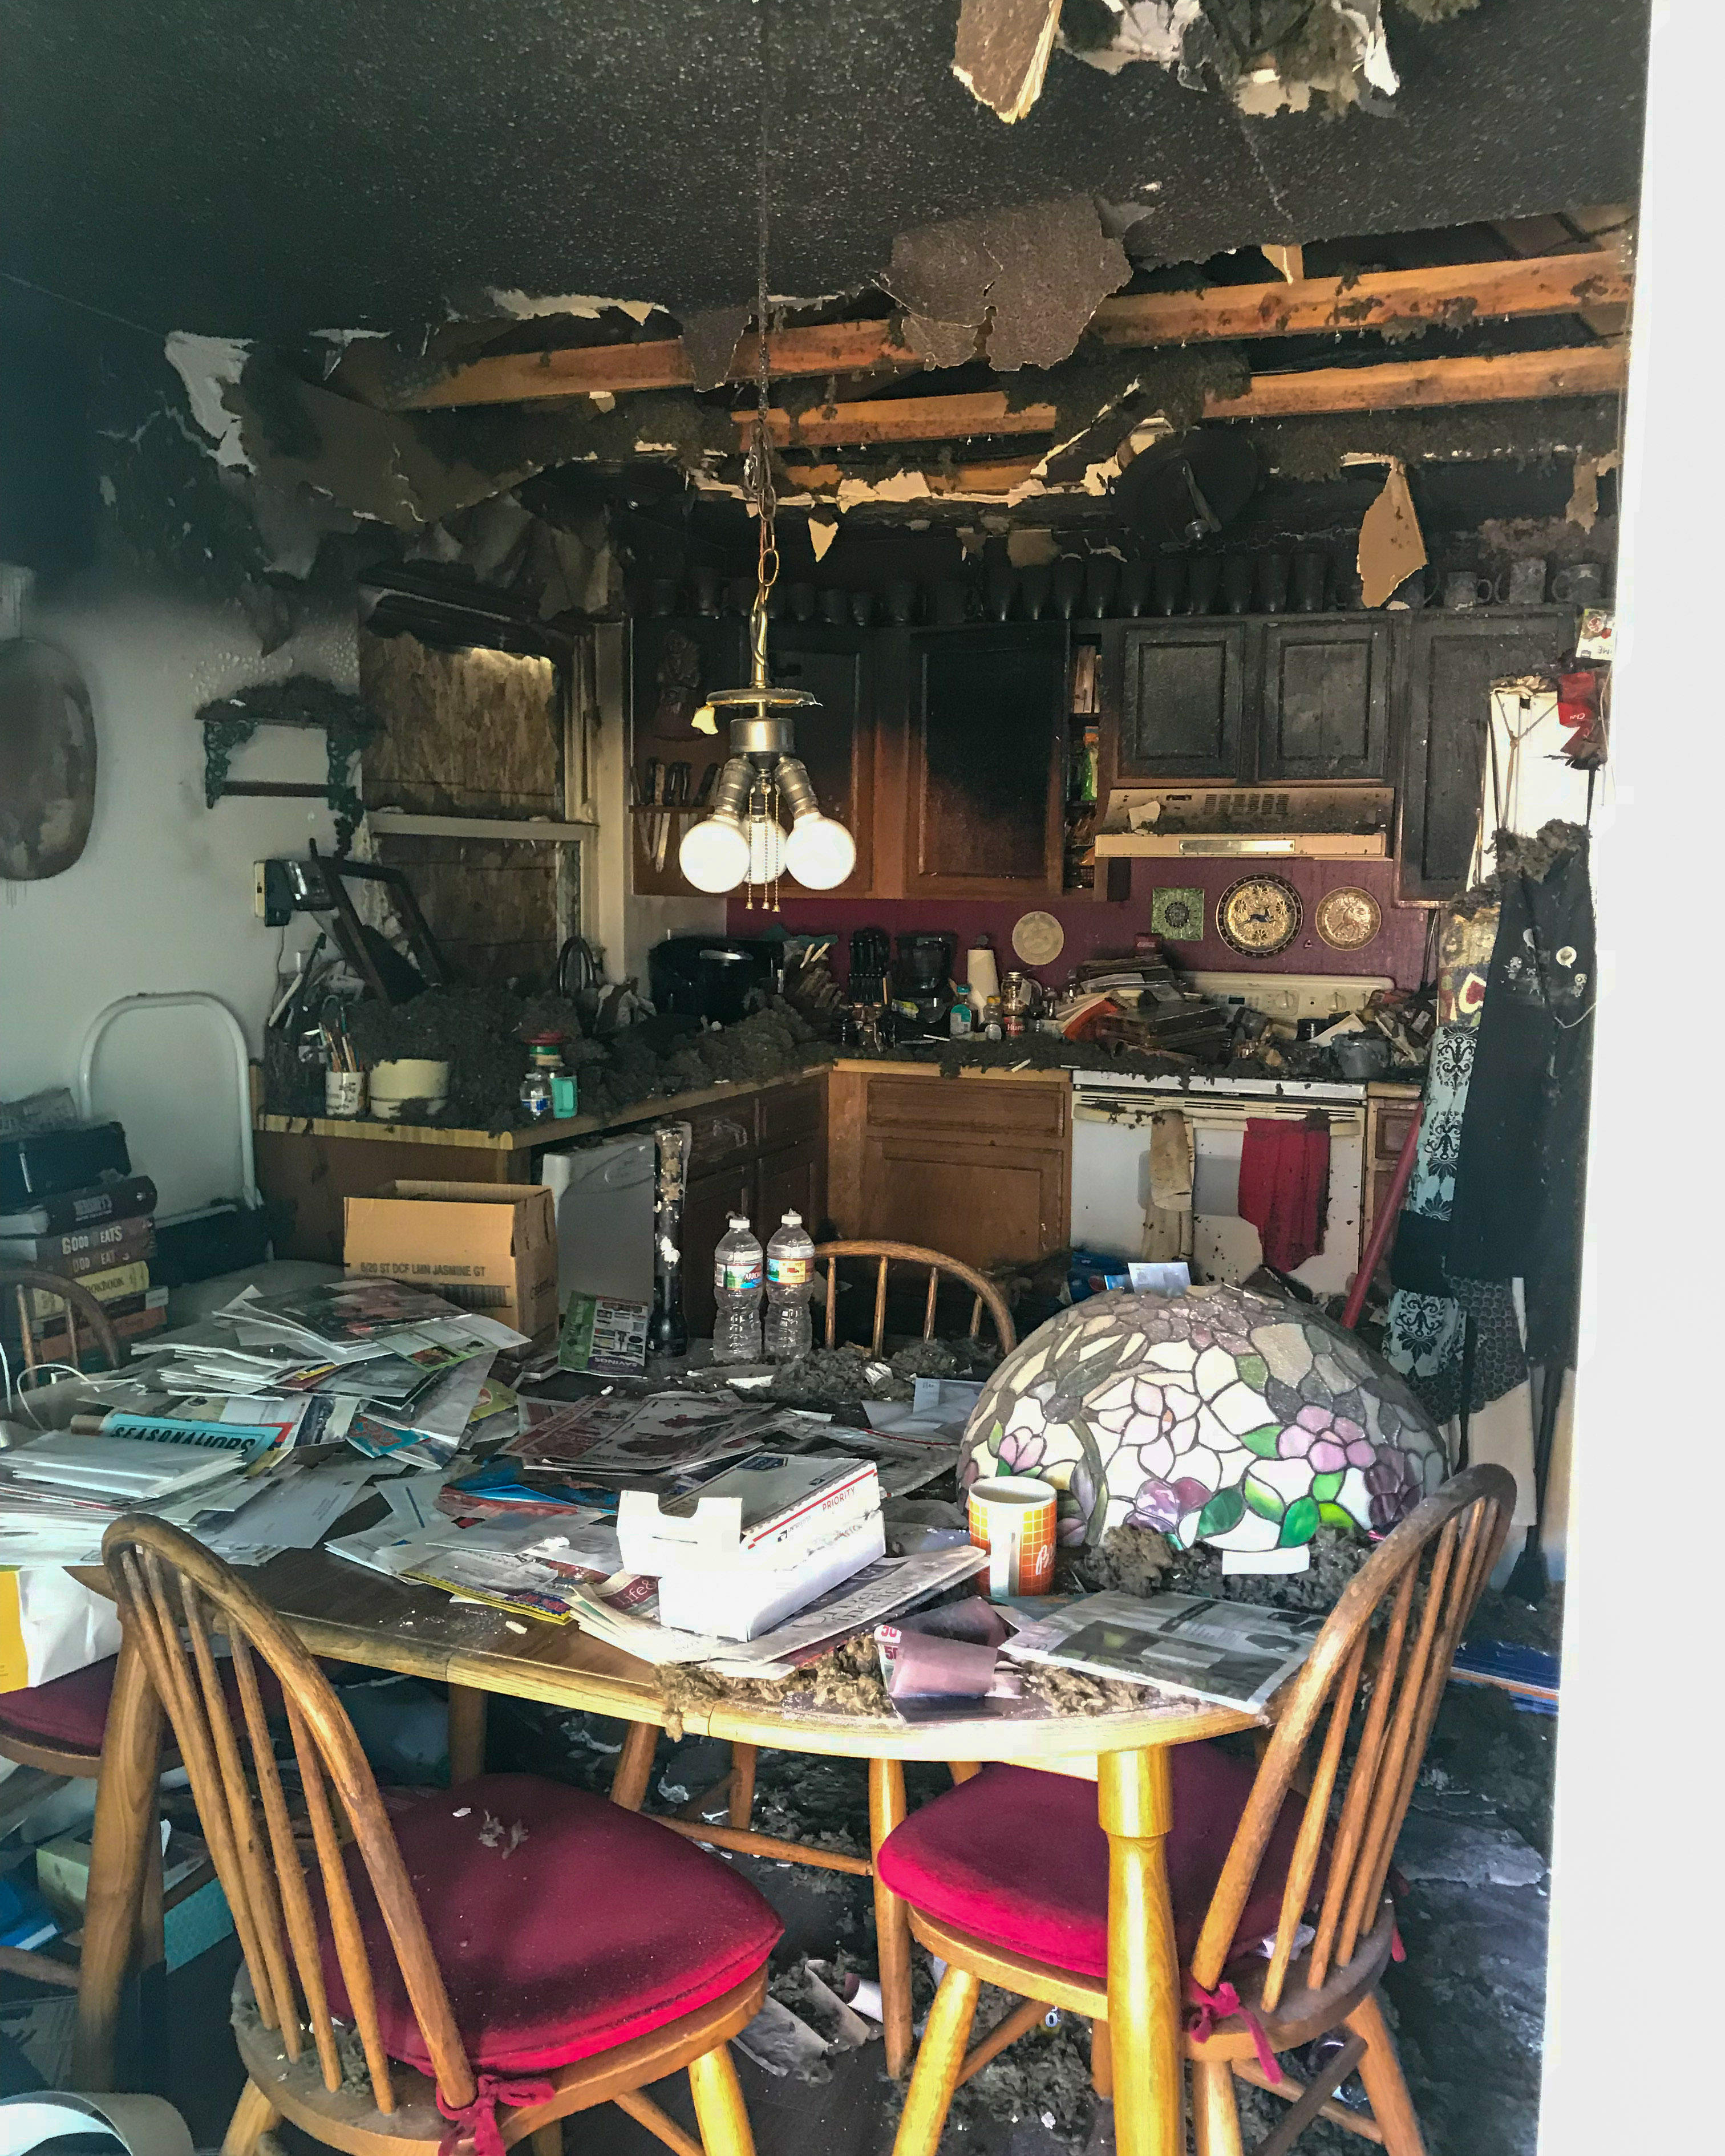 After a house fire, the damage to your Denver property will include smoke, and soot damage, as well as water damage as a result of the firefighting efforts